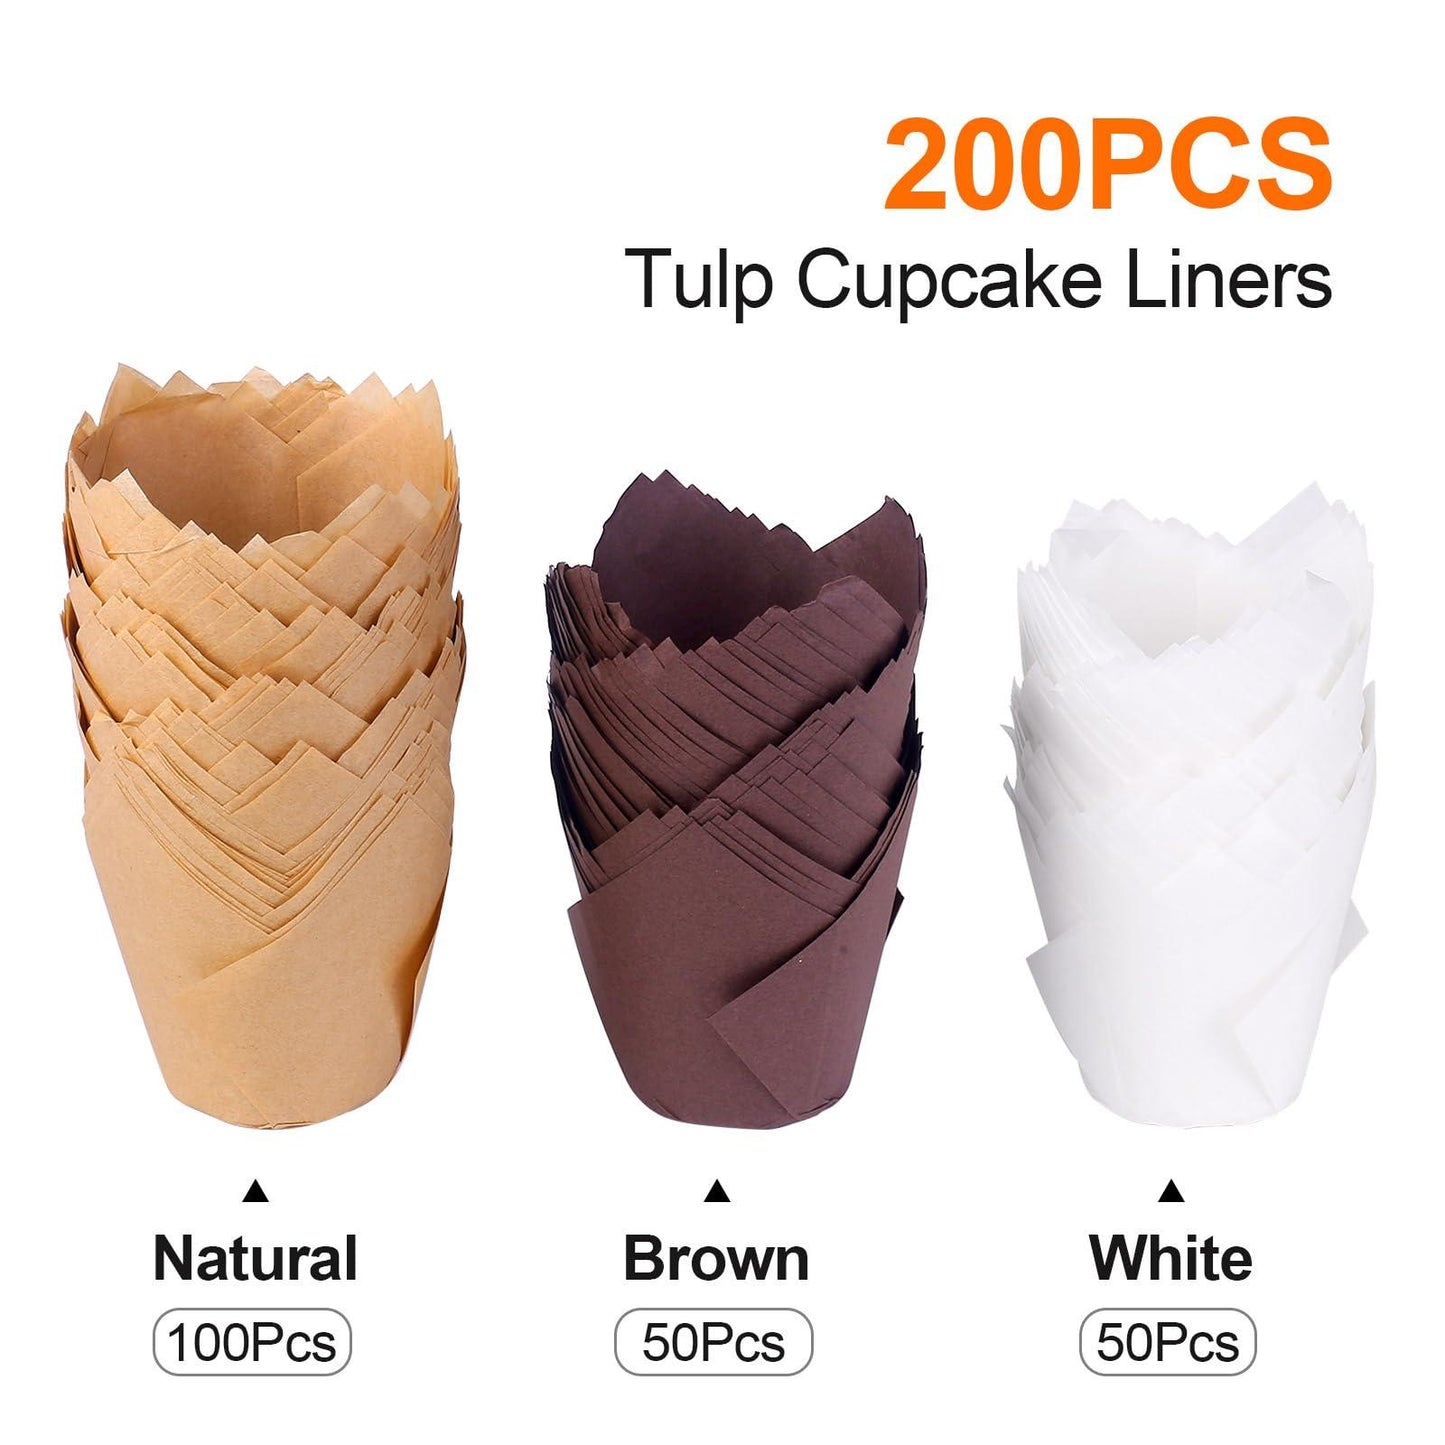 200PCS Tulip Cupcake Liners, Upgrade Parchment Paper Muffin Liners for Baking, Cupcake Wrapper for Party, Wedding, Birthday, Standard Size, Natural White Brown - CookCave